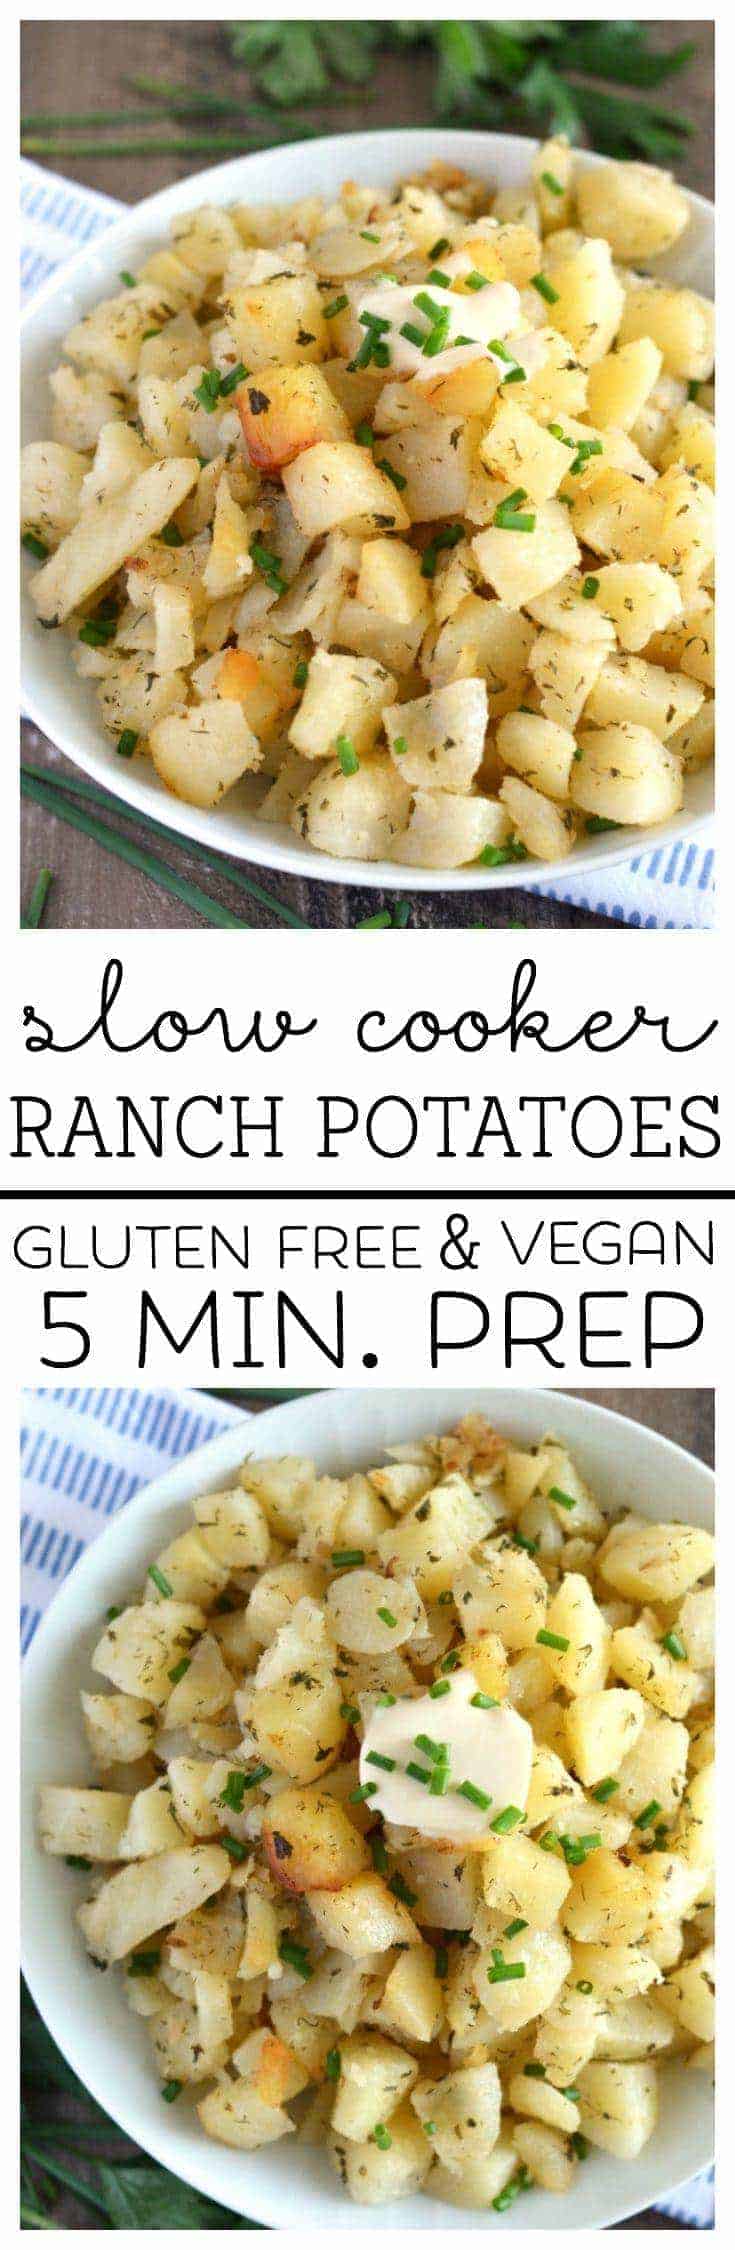 Slow Cooker Ranch Potatoes (gluten free and vegan) with only 5 minutes prep! From What The Fork Food Blog | @WhatTheForkBlog | whattheforkfoodblog.com